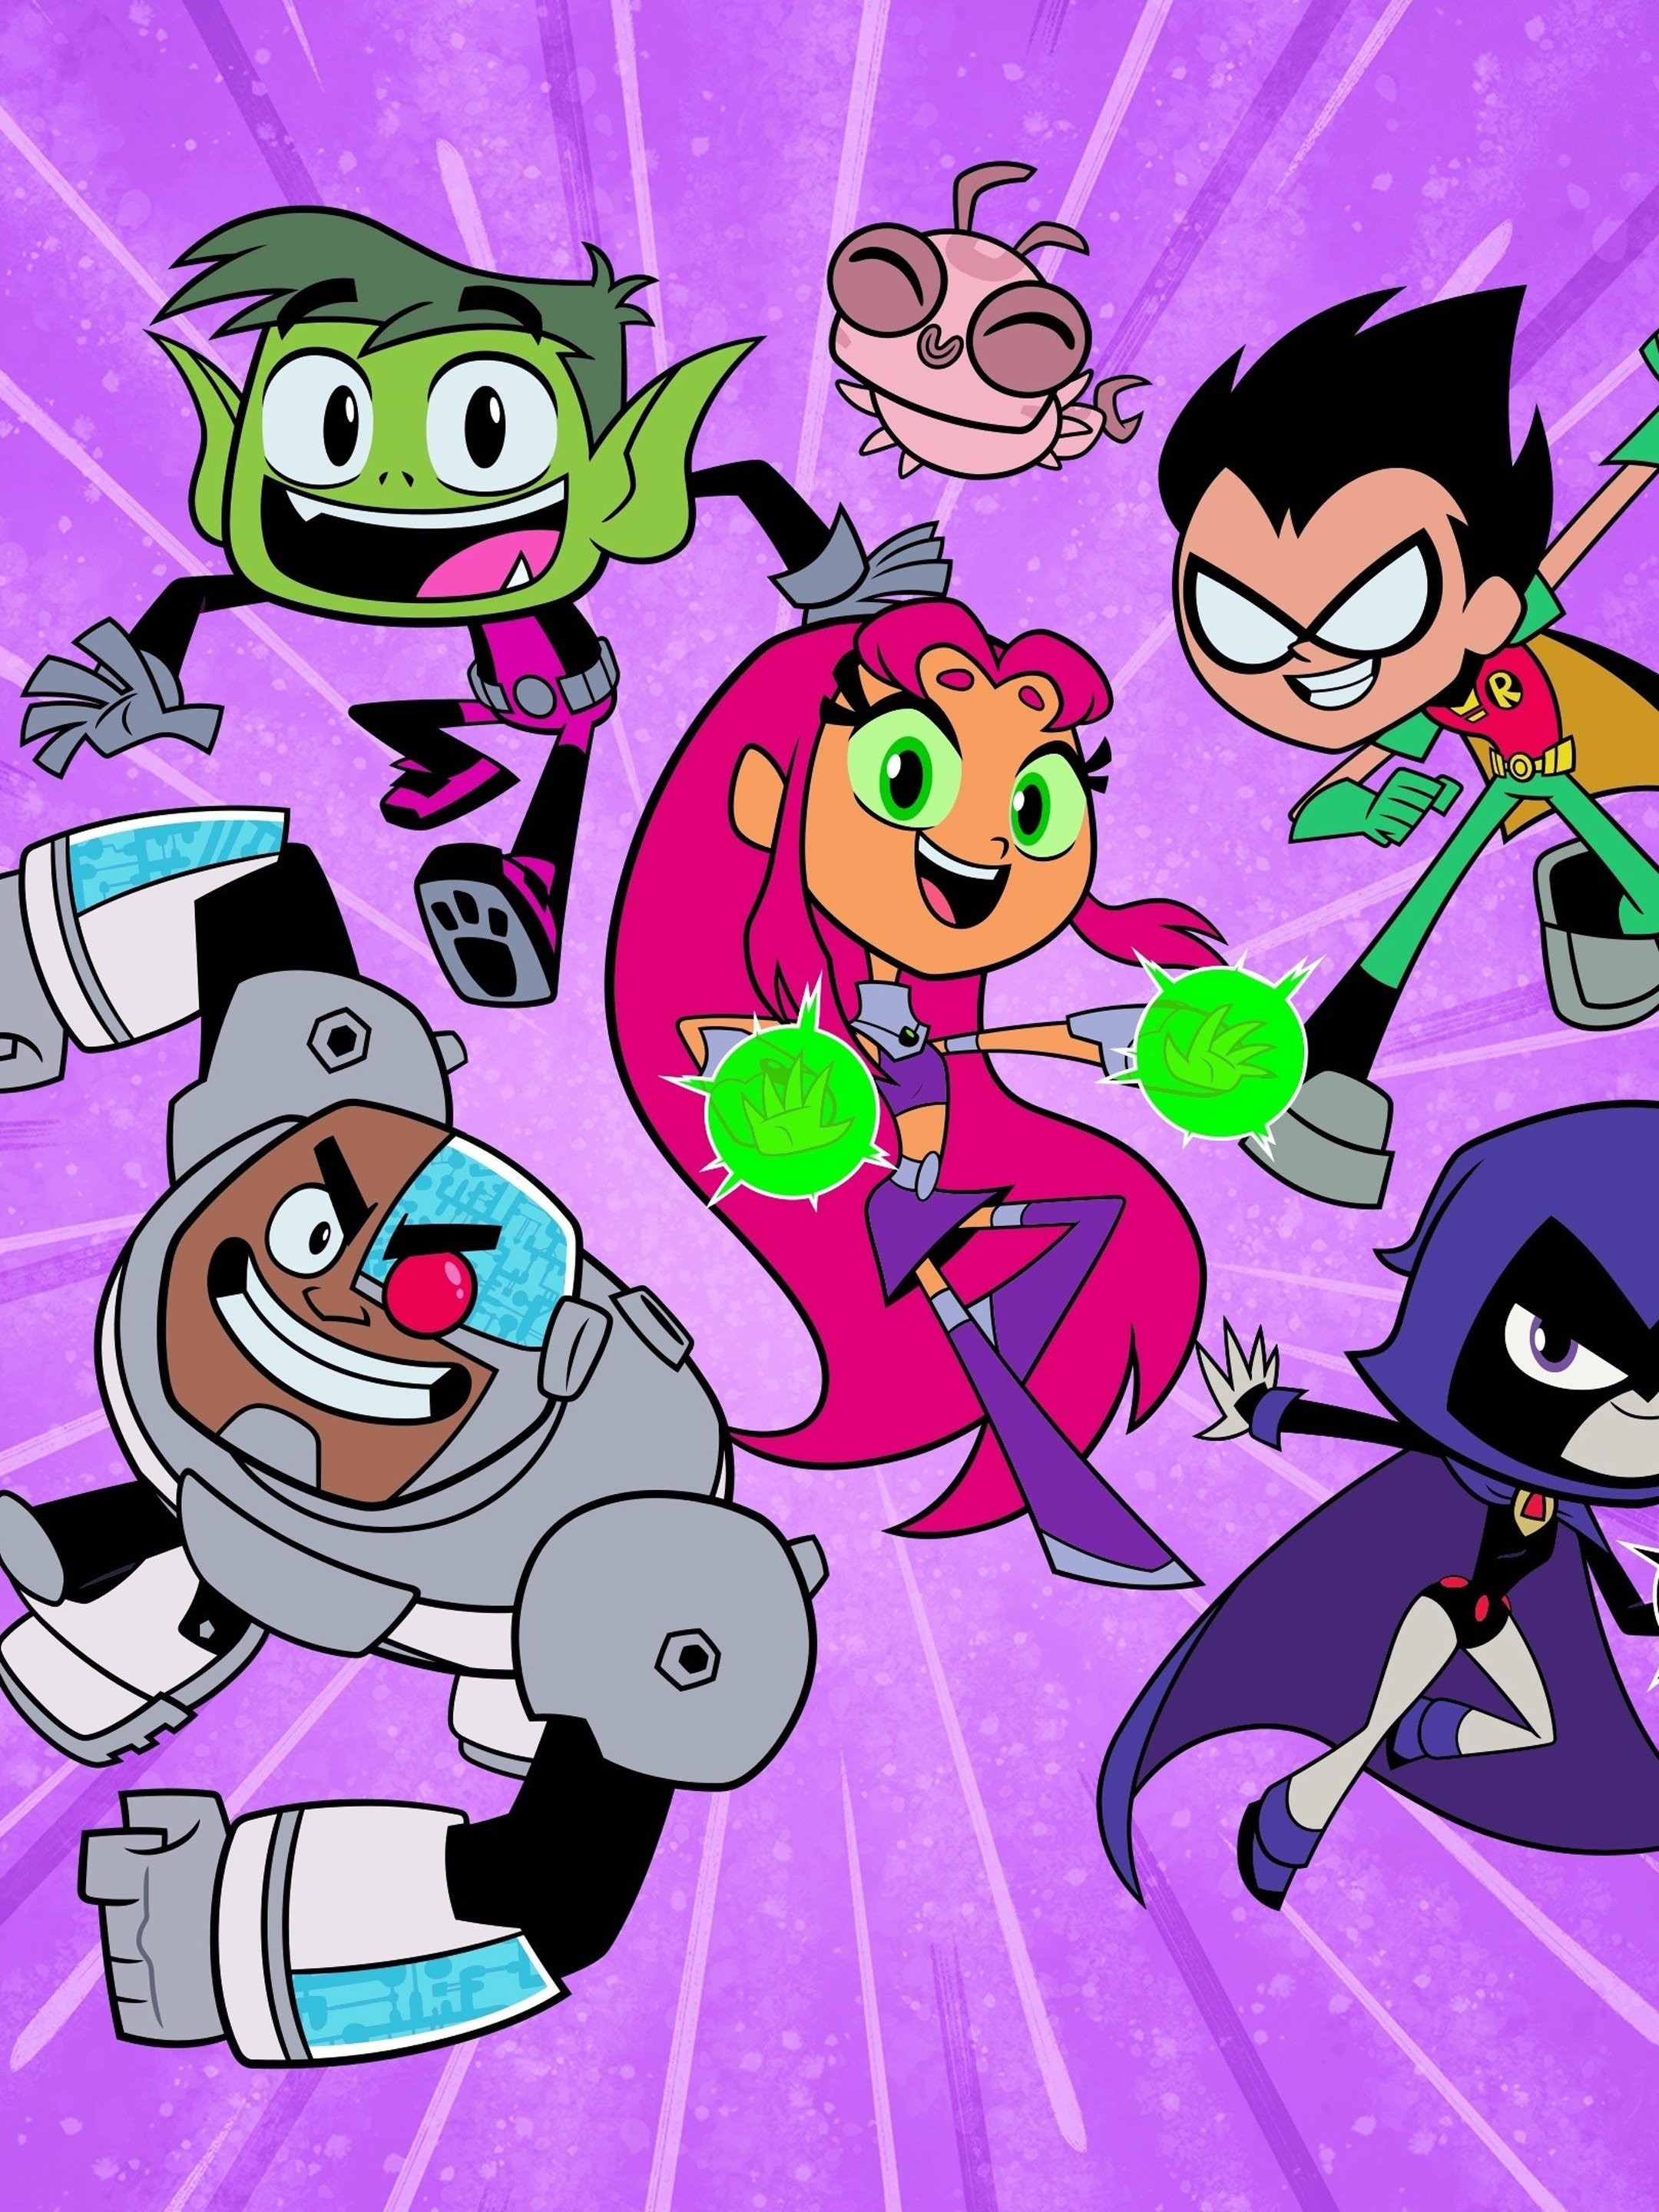 aiden hayes recommends teen titans episode 64 pic